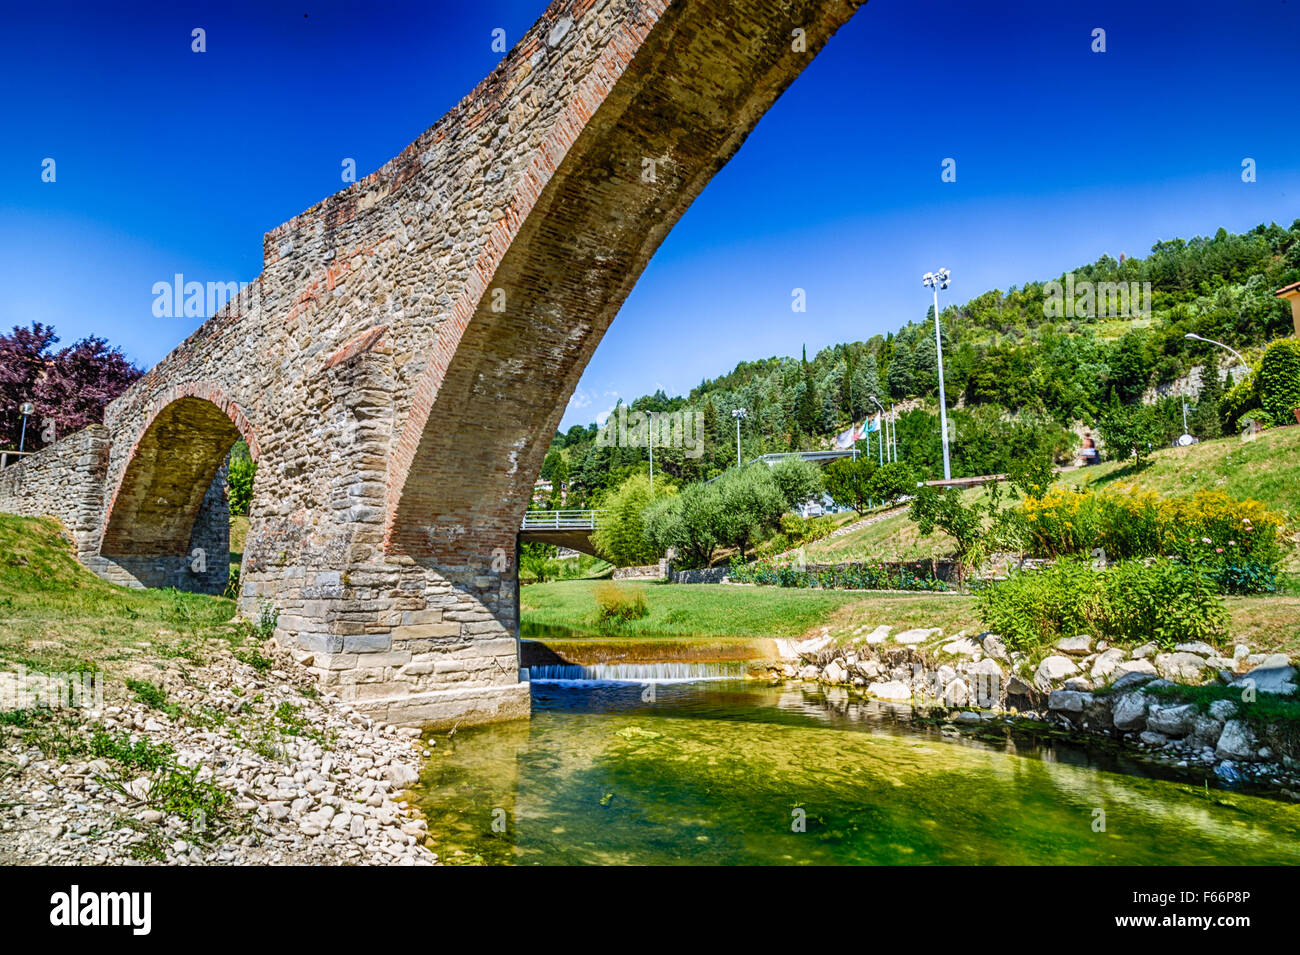 The XVIII century bridge in Modigliana in Italy is overlooking the quiet waters of a small creek with the medieval humpback structure of the three archs Stock Photo